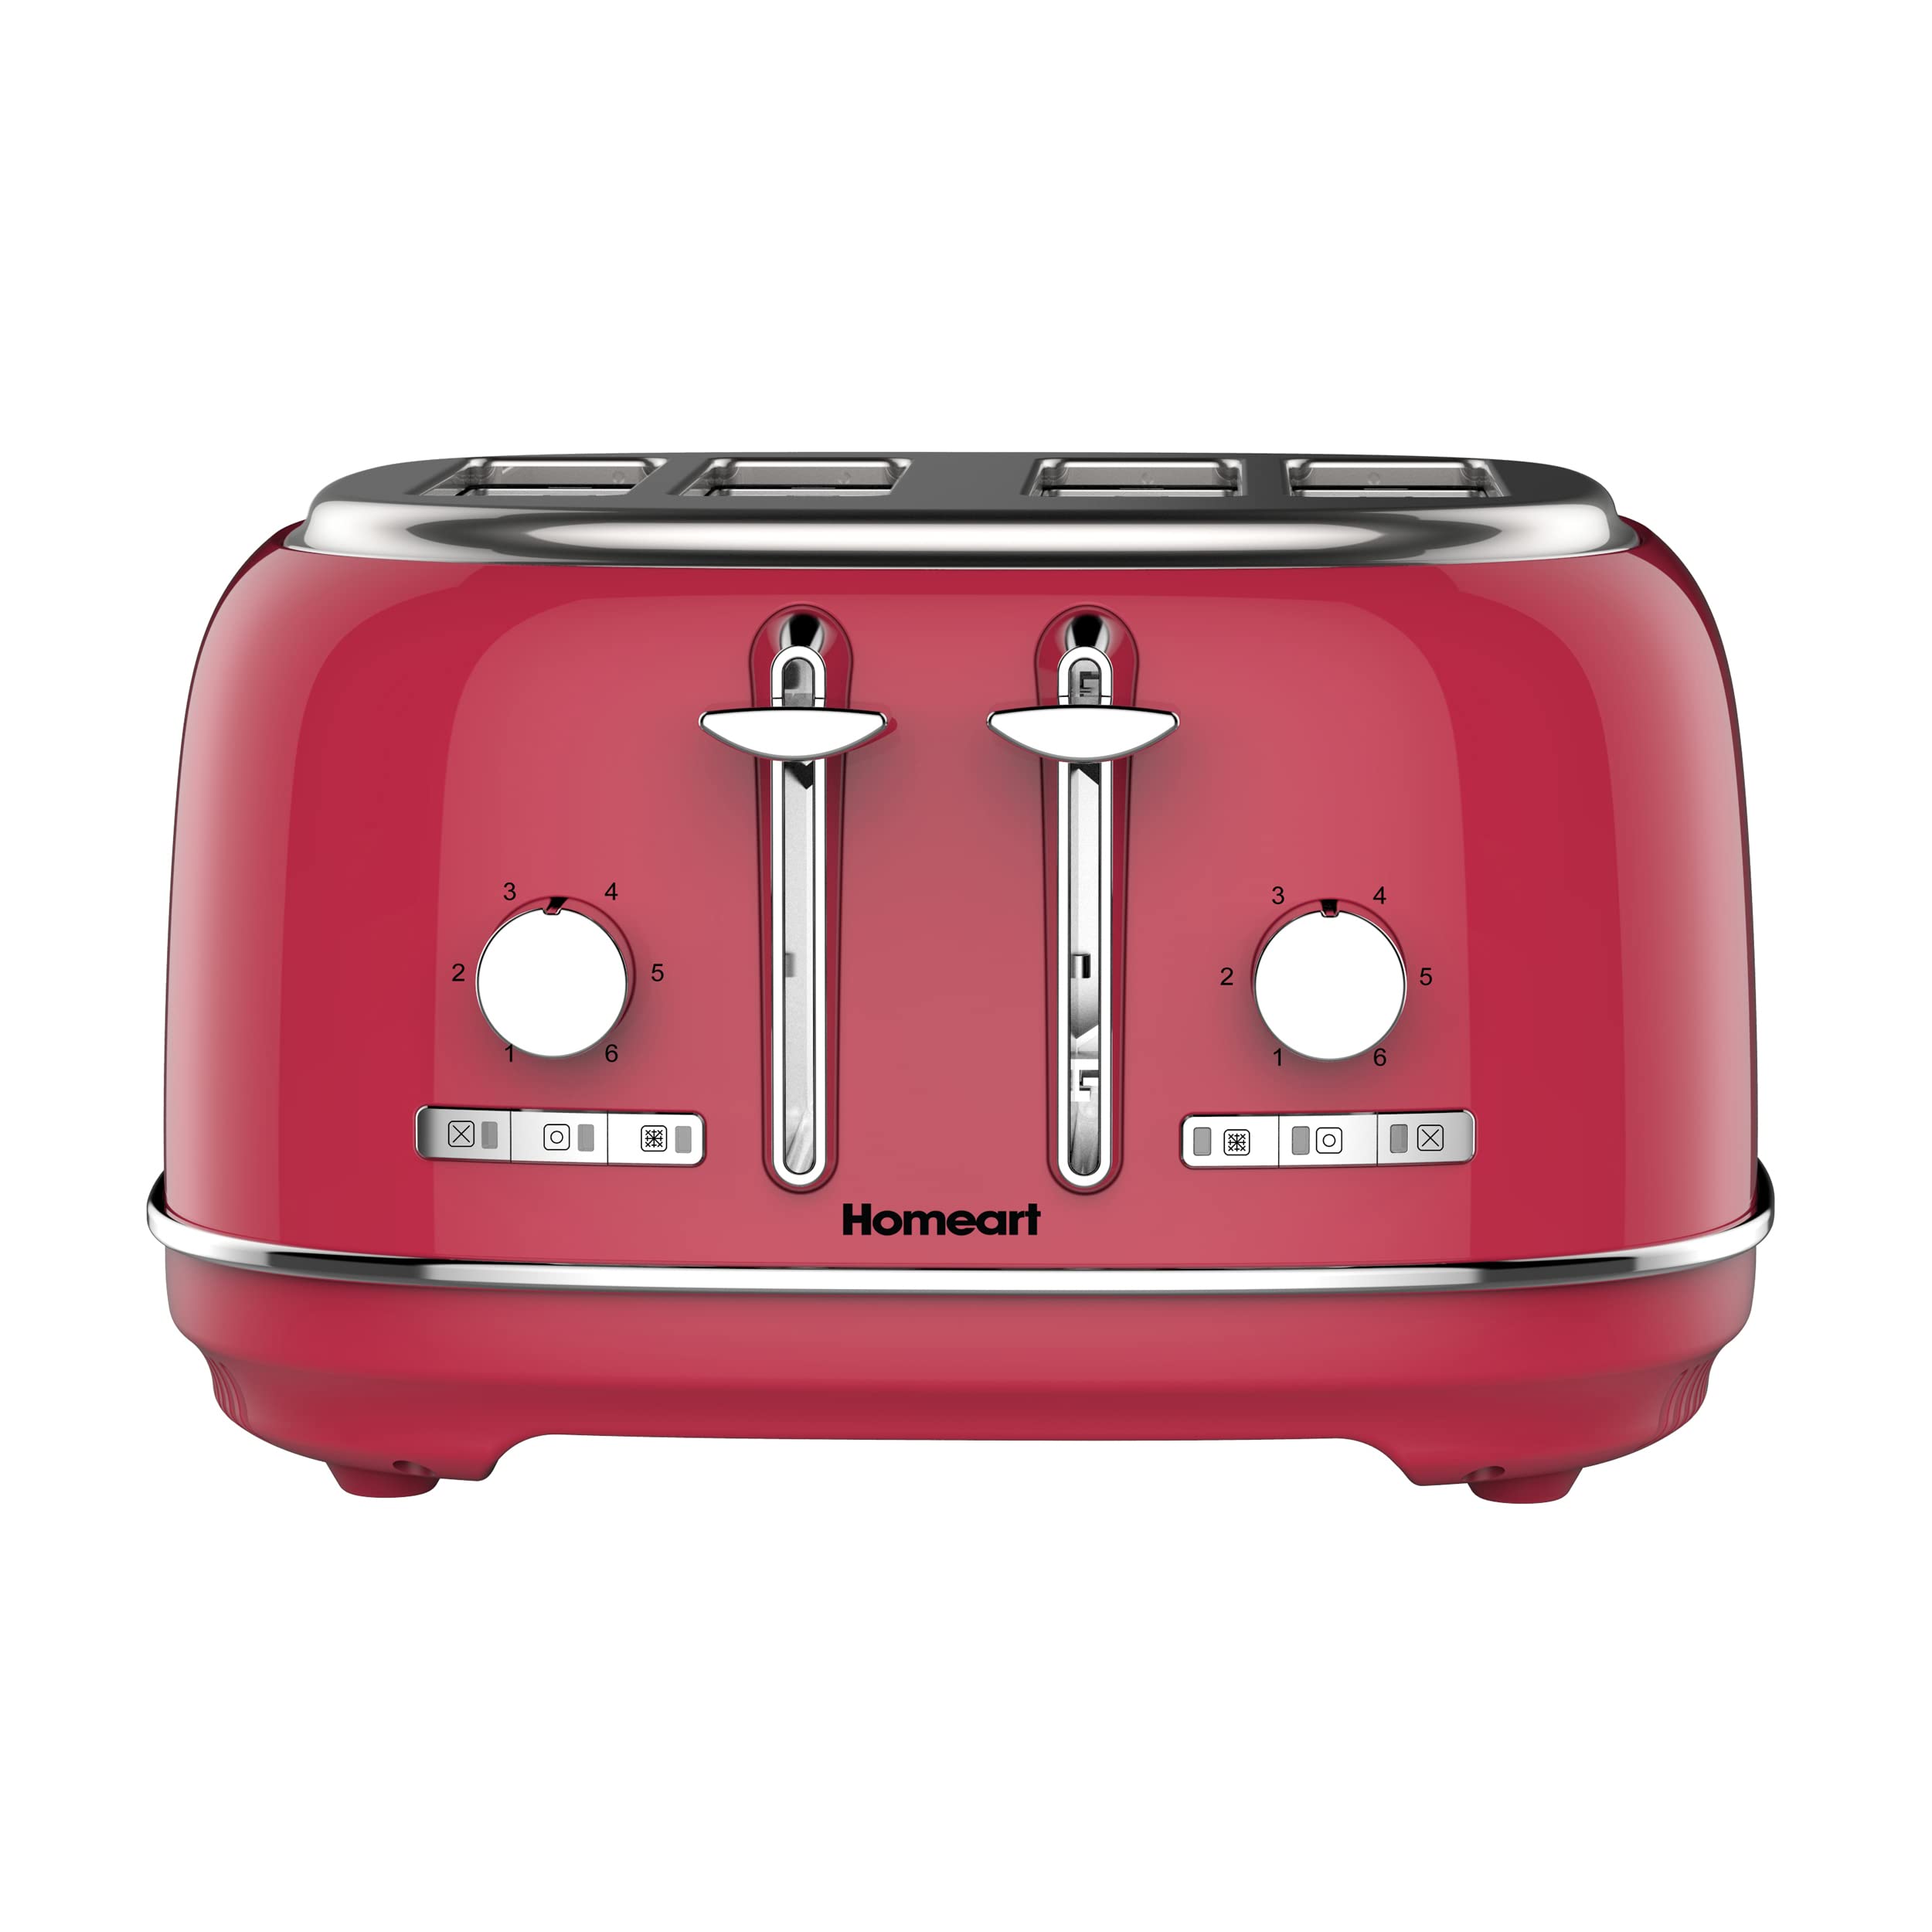 Homeart Alyssa 4-Slice Retro Toaster - Stainless Steel With Removable Crumb Tray, Adjustable Browning Control With Multiple Settings to Cancel, Defrost and Bagel - 1500W